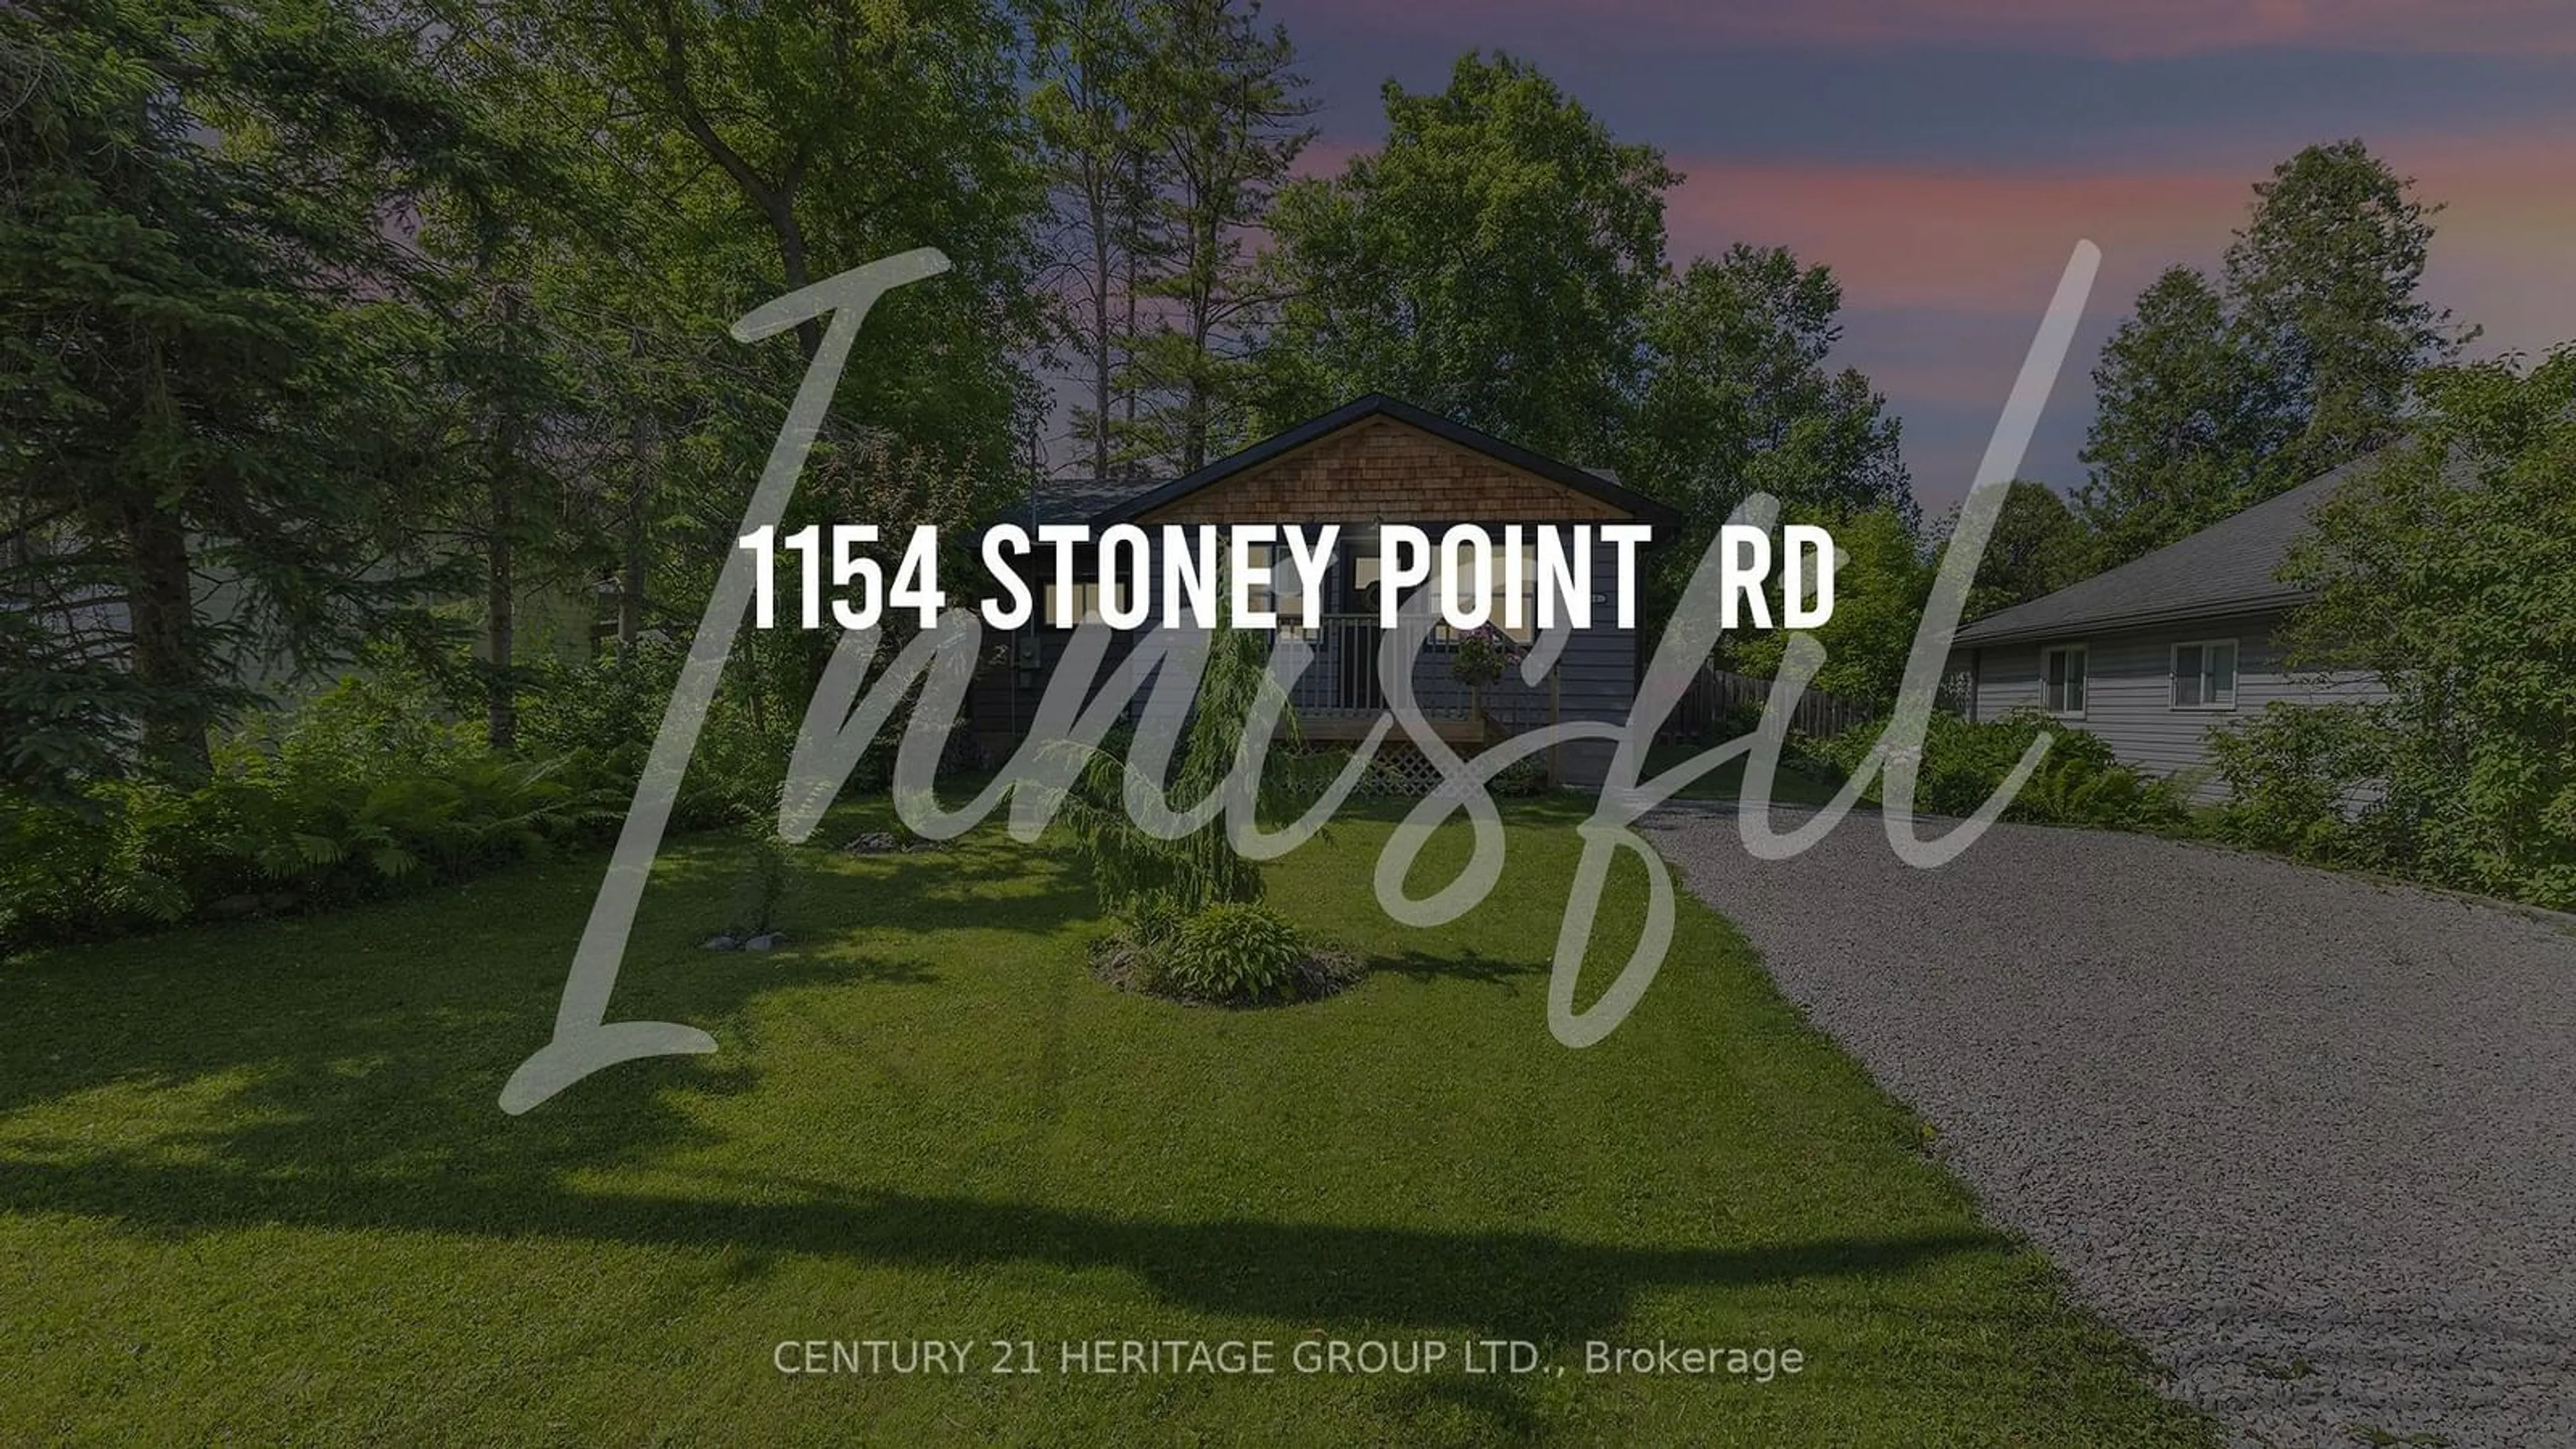 Frontside or backside of a home for 1154 Stoney Point Rd, Innisfil Ontario L0L 1W0